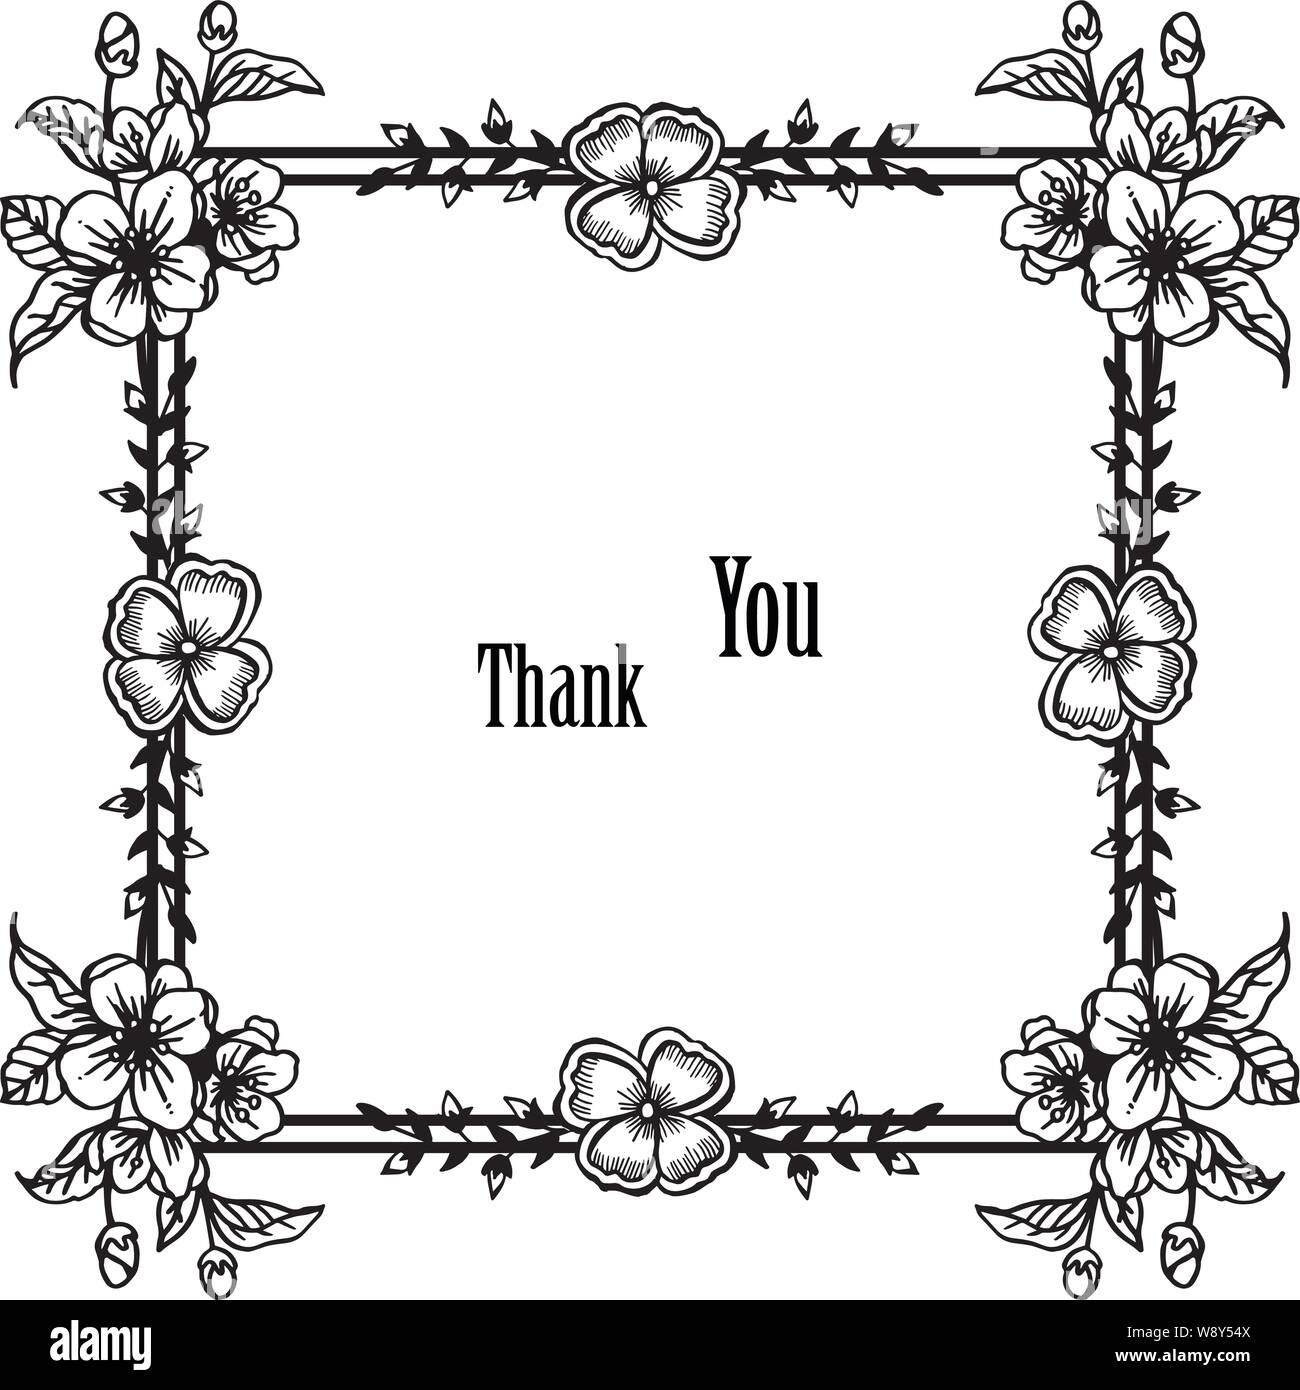 Wallpaper of greeting card thank you, pattern beautiful flower frame ...